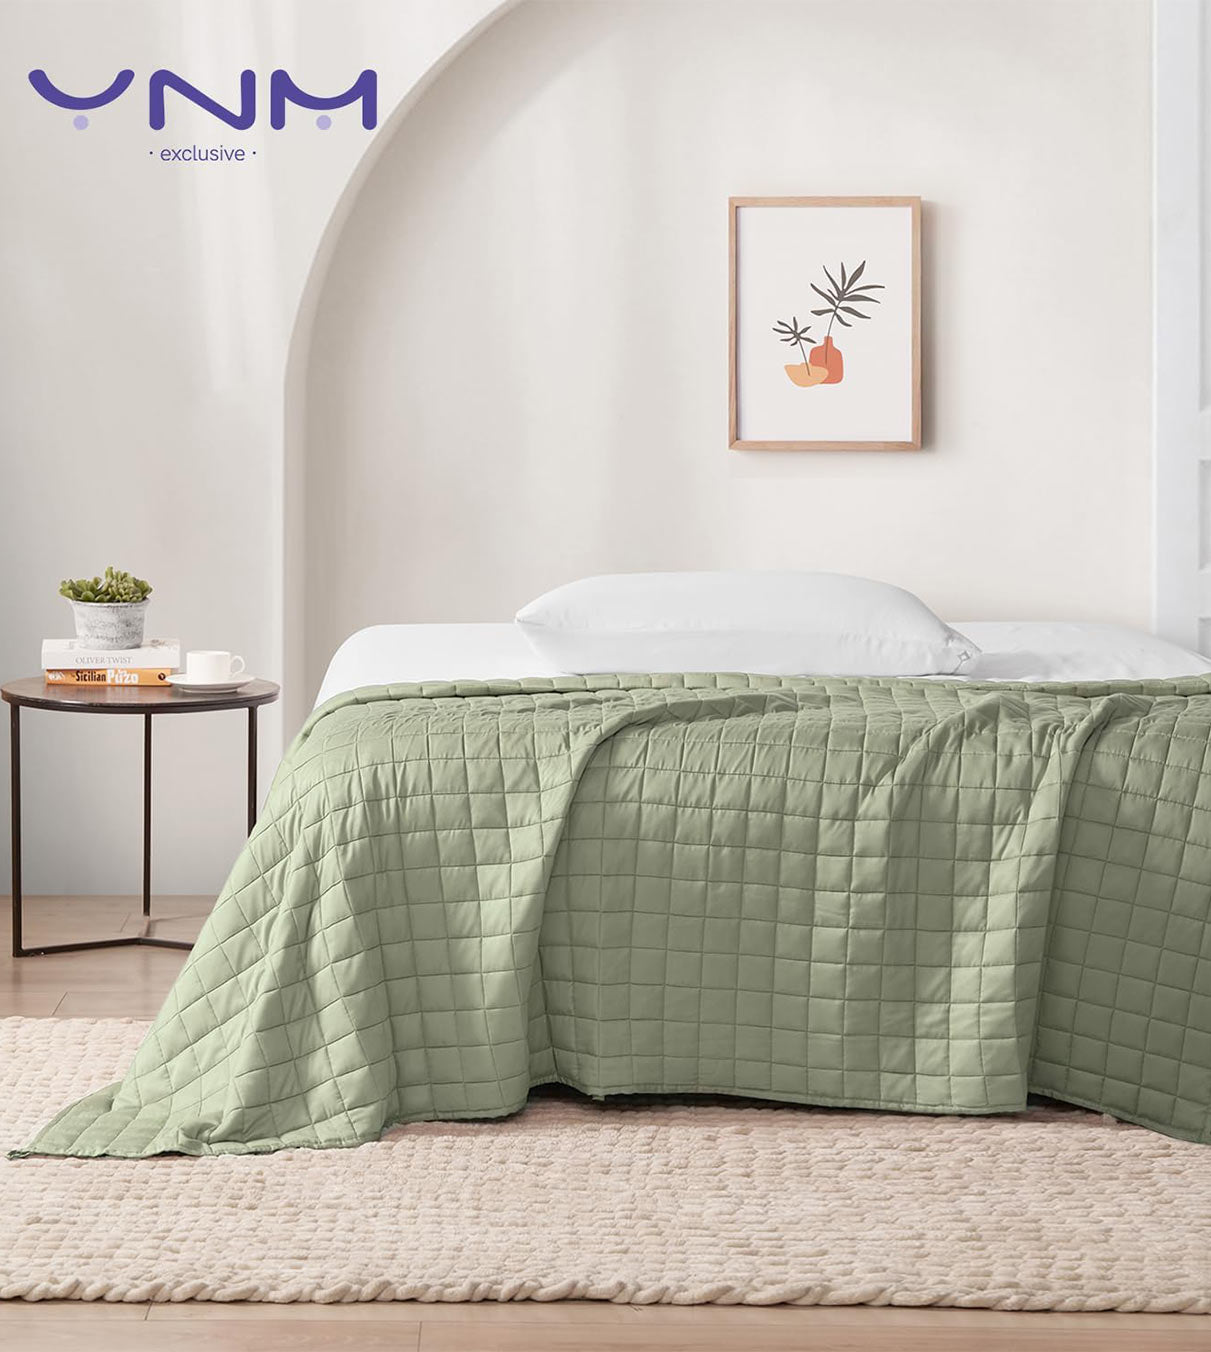 Product: 15lb Weighted Blanket | Color: Cotton-Polyester Avocado White 3.0